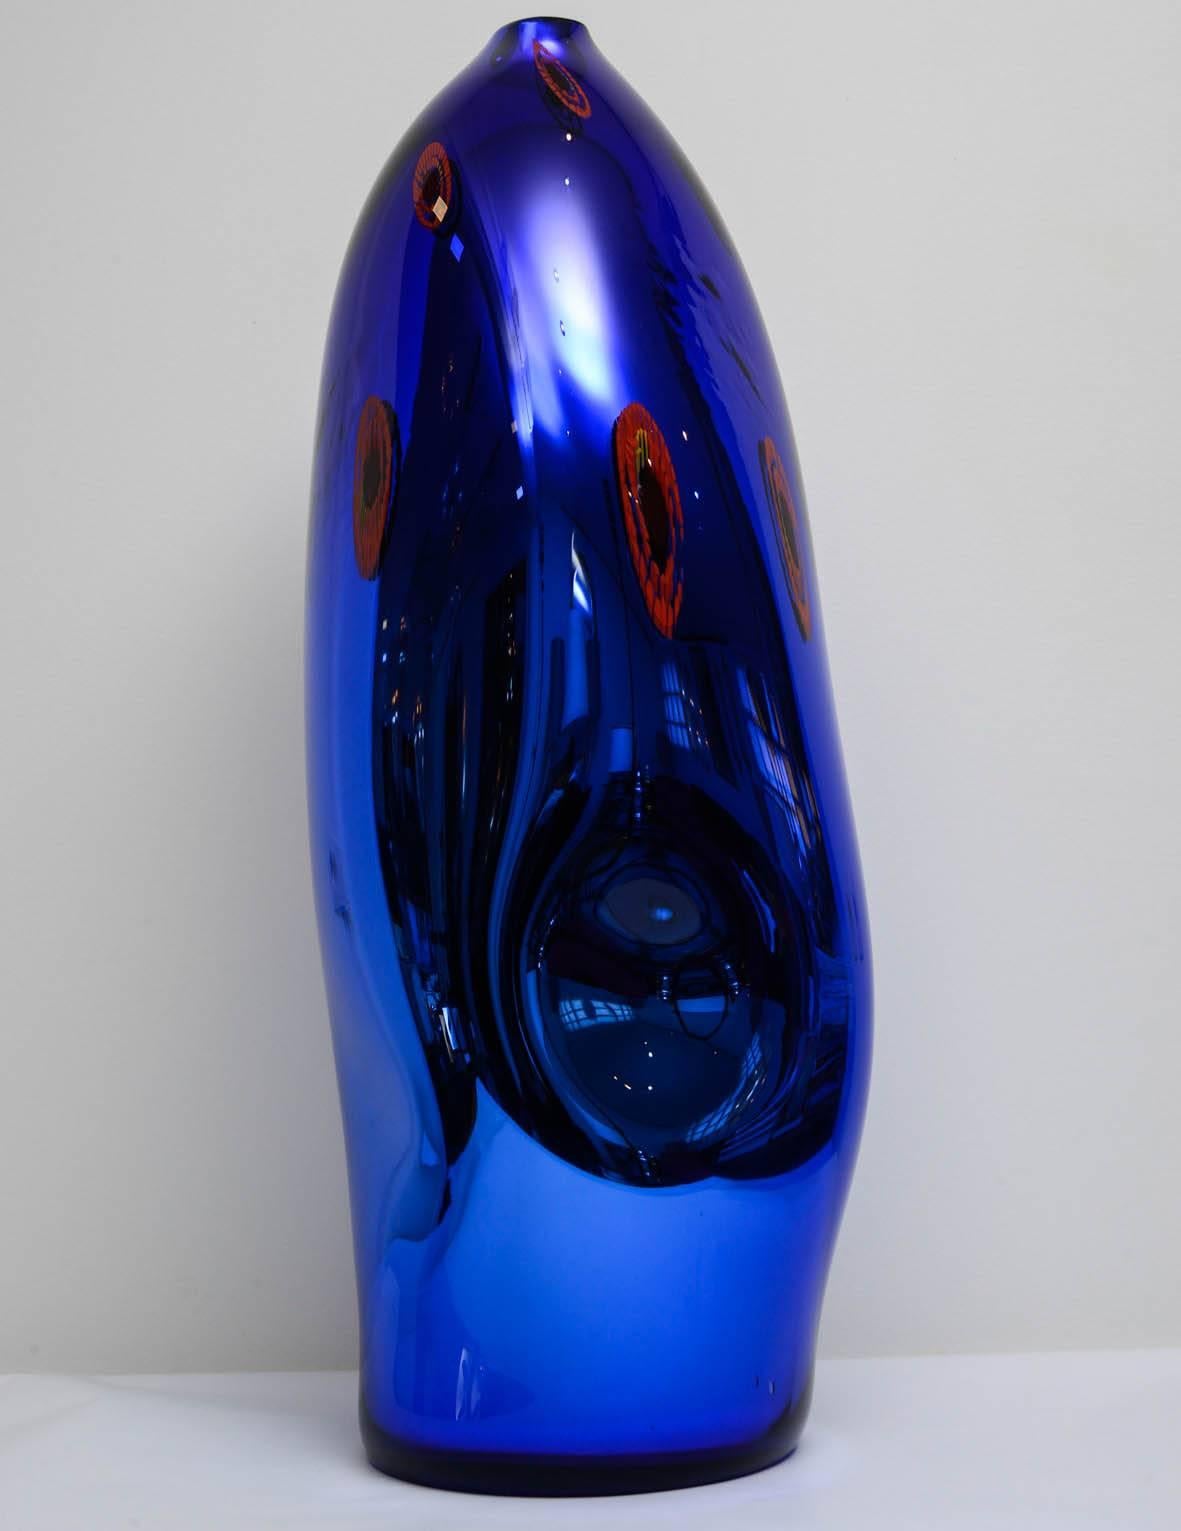 Mid-Century Modern Spectacular Murano Glass Vase by Davide Dona, Unique Piece